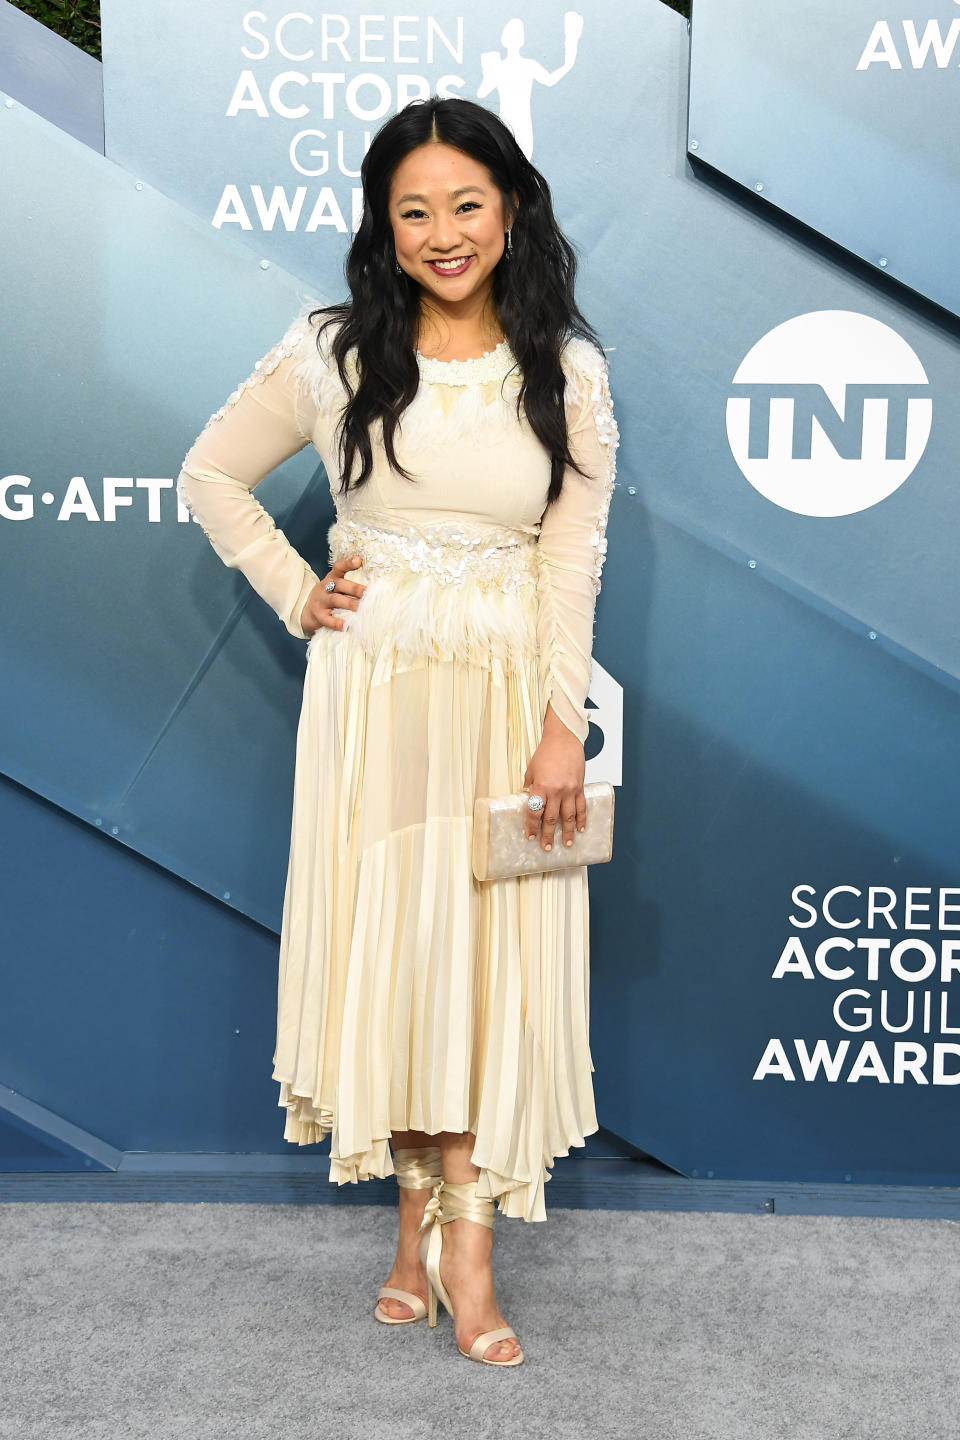 LOS ANGELES, CALIFORNIA - JANUARY 19: Stephanie Hsu attends the 26th Annual Screen Actors Guild Awards at The Shrine Auditorium on January 19, 2020 in Los Angeles, California. (Photo by Steve Granitz/WireImage)